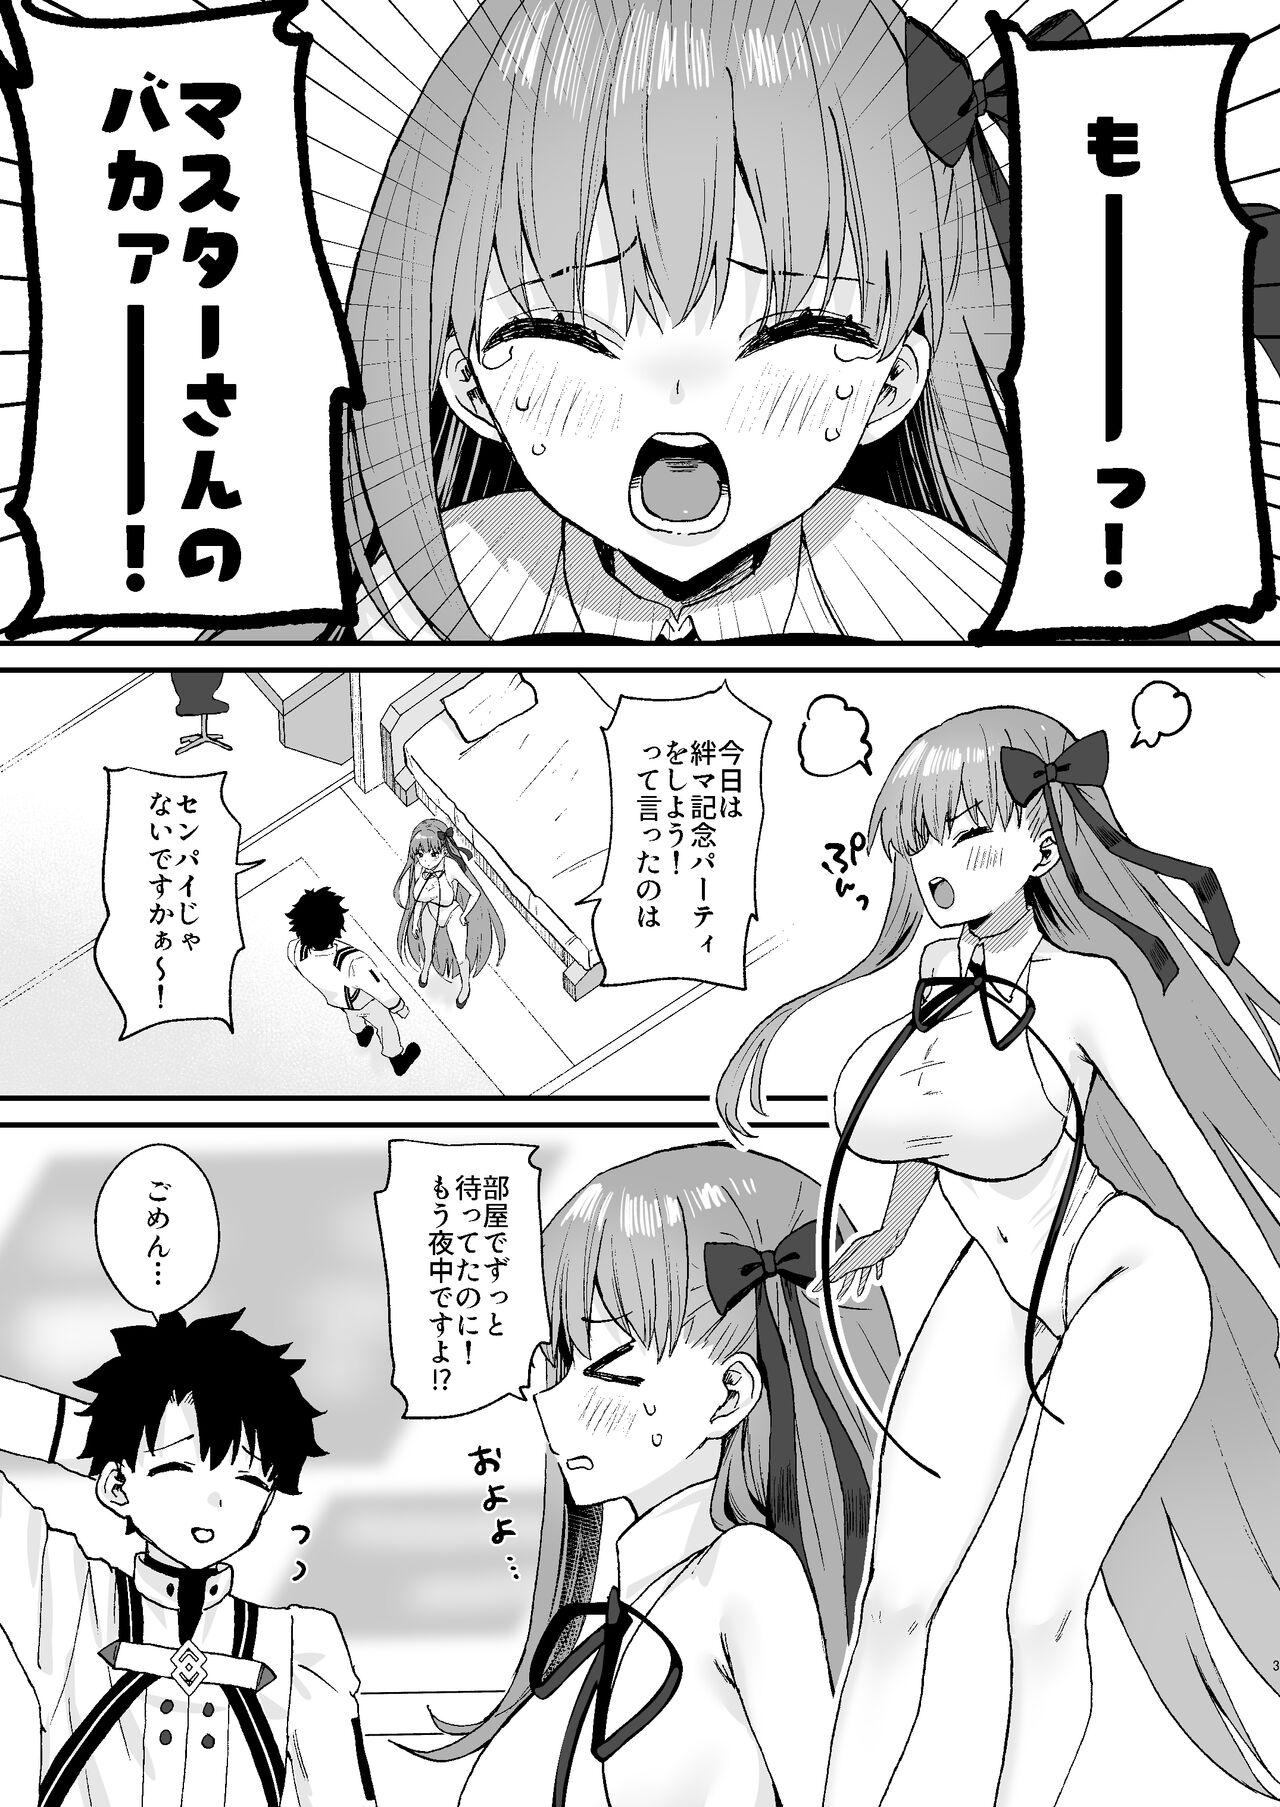 Domination BB-chan to Icha Love - Fate grand order Blackcock - Page 3